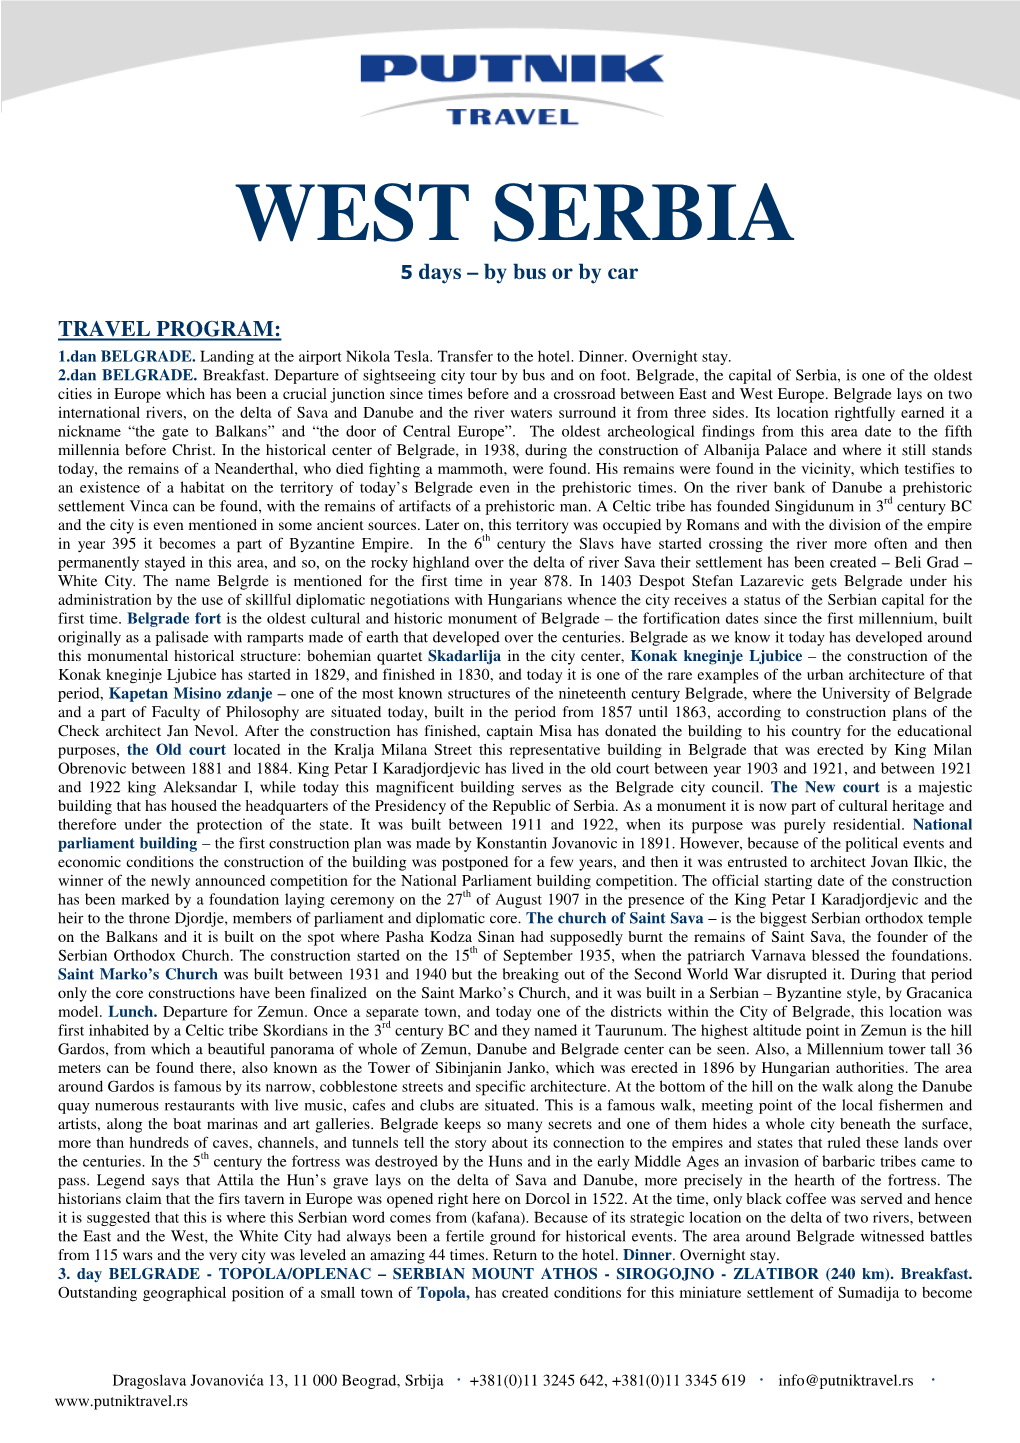 WEST SERBIA 5 Days – by Bus Or by Car